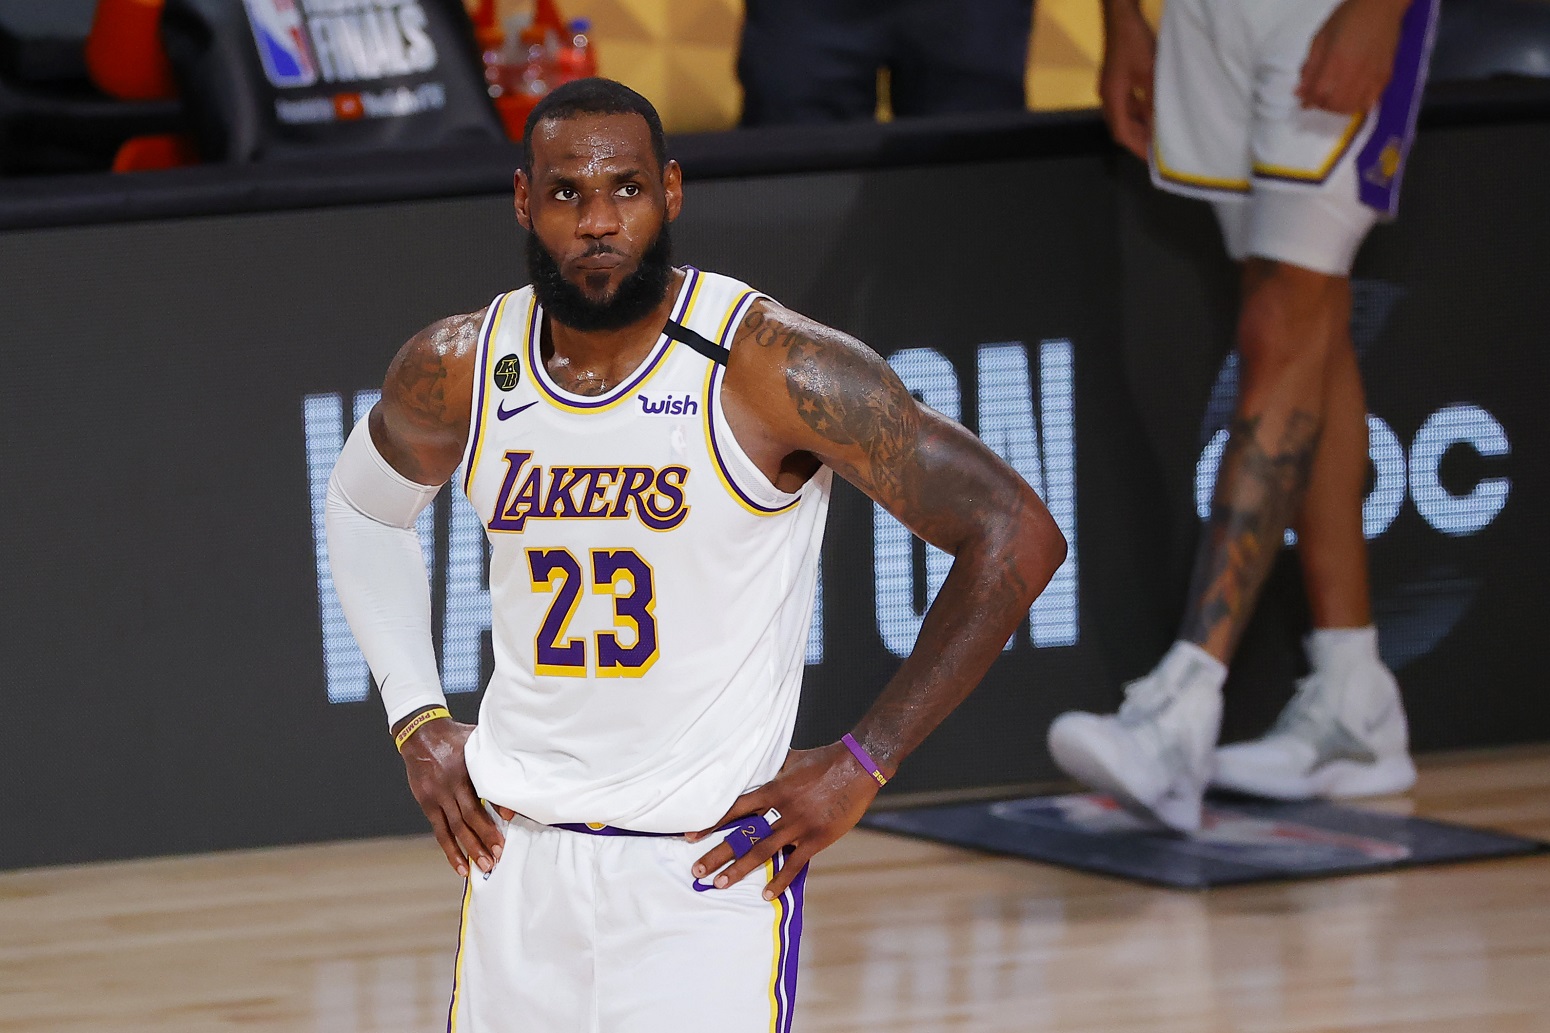 LeBron James Explains Why He Focuses More on the 2020 Election Instead of Battling Donald Trump